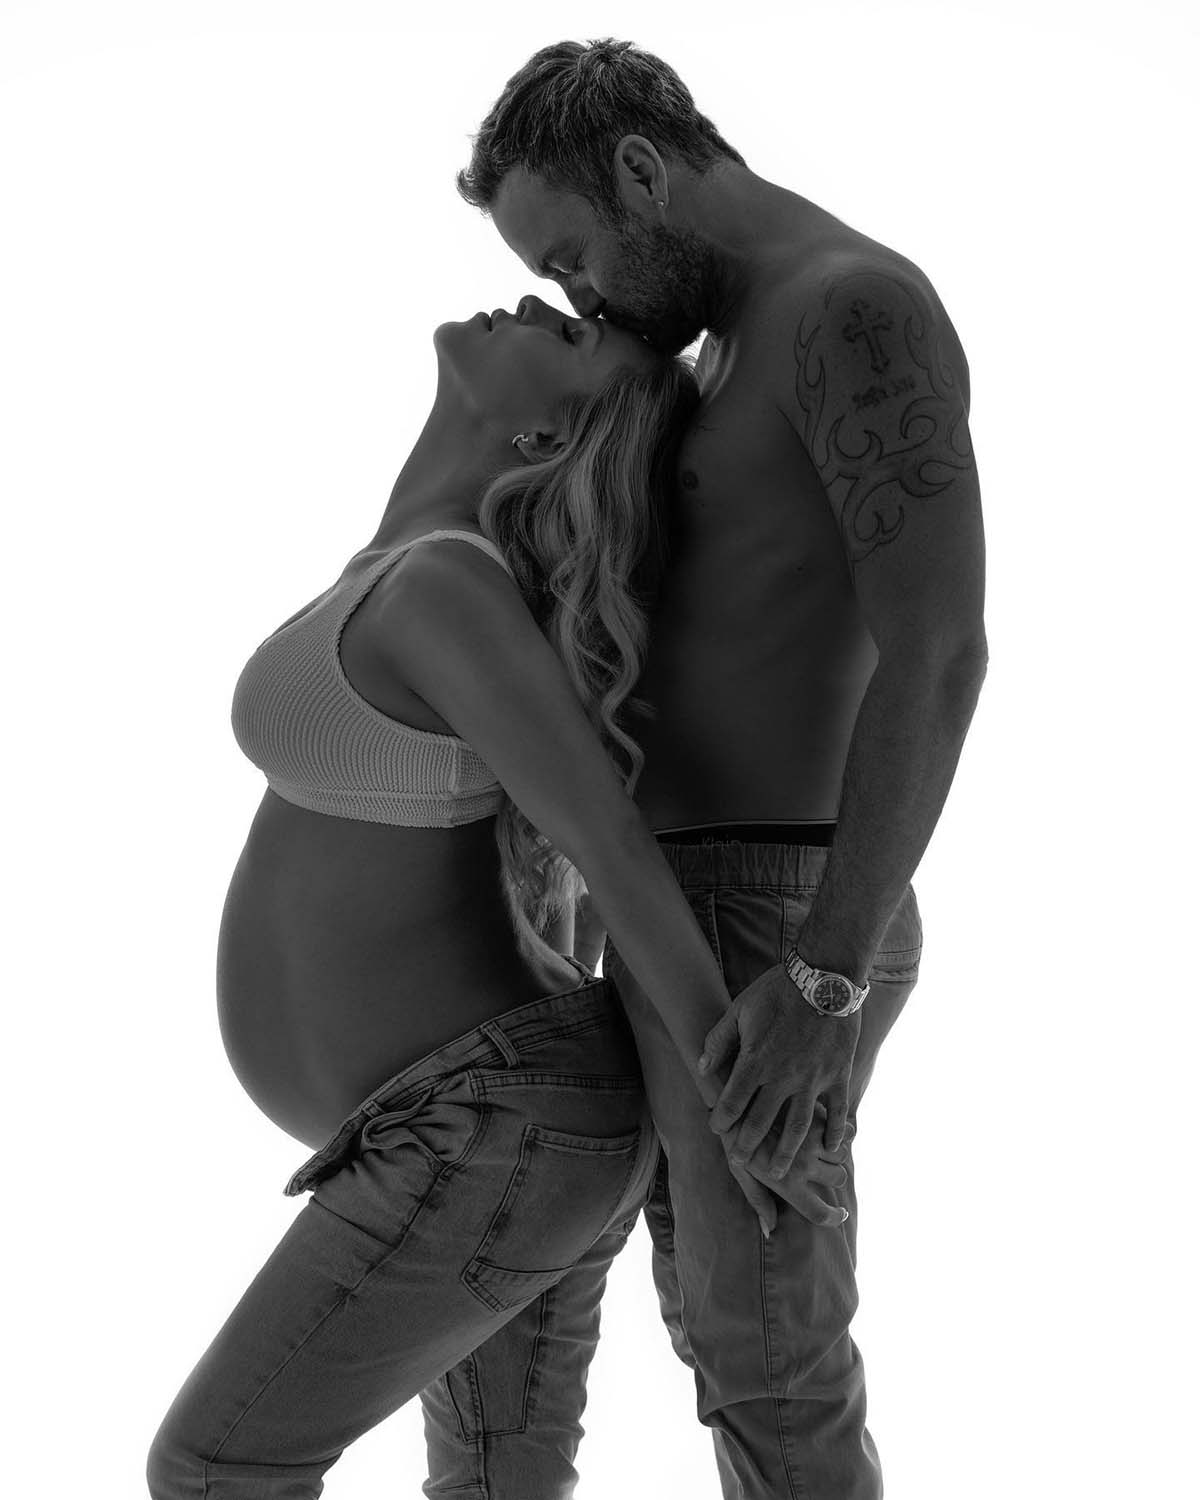 Rosa Black Pregnant Porn - Pregnant Stars' Gorgeous Maternity Shoots Over the Years: Pics